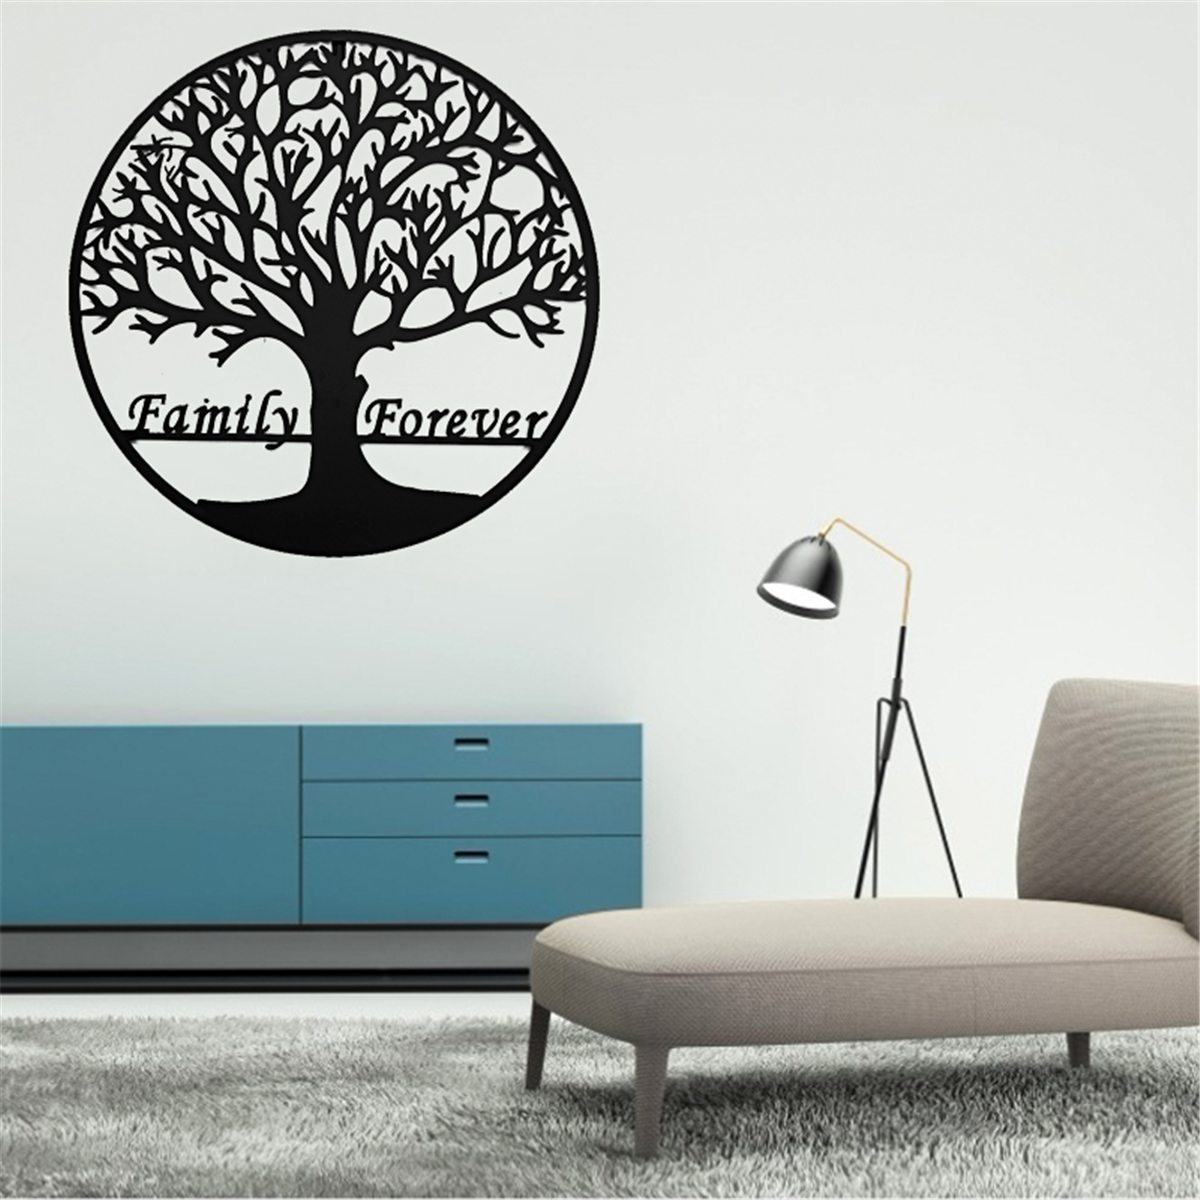 24in60cm-Metal-Tree-Hanging-Wall-Art-Round-Sculpture-Family-Forever-Home-Decoration-1780896-2